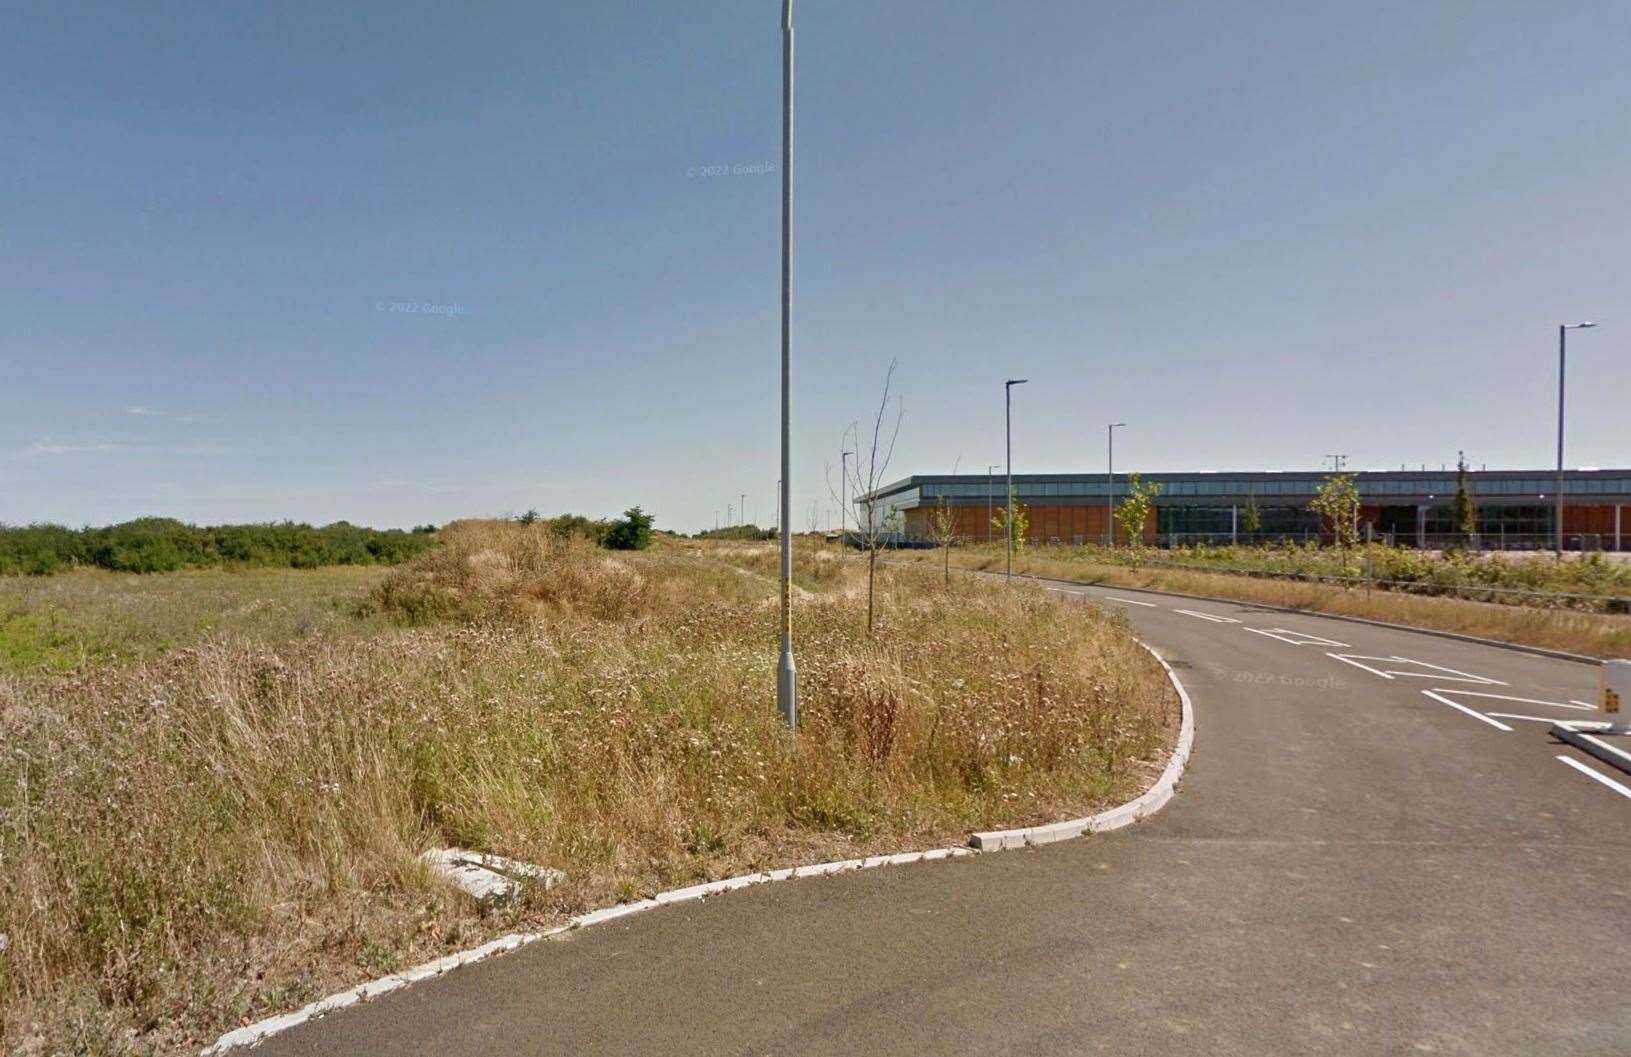 The new David Lloyd gym would be on land next to Sainsbury's in Herne Bay. Picture: Google